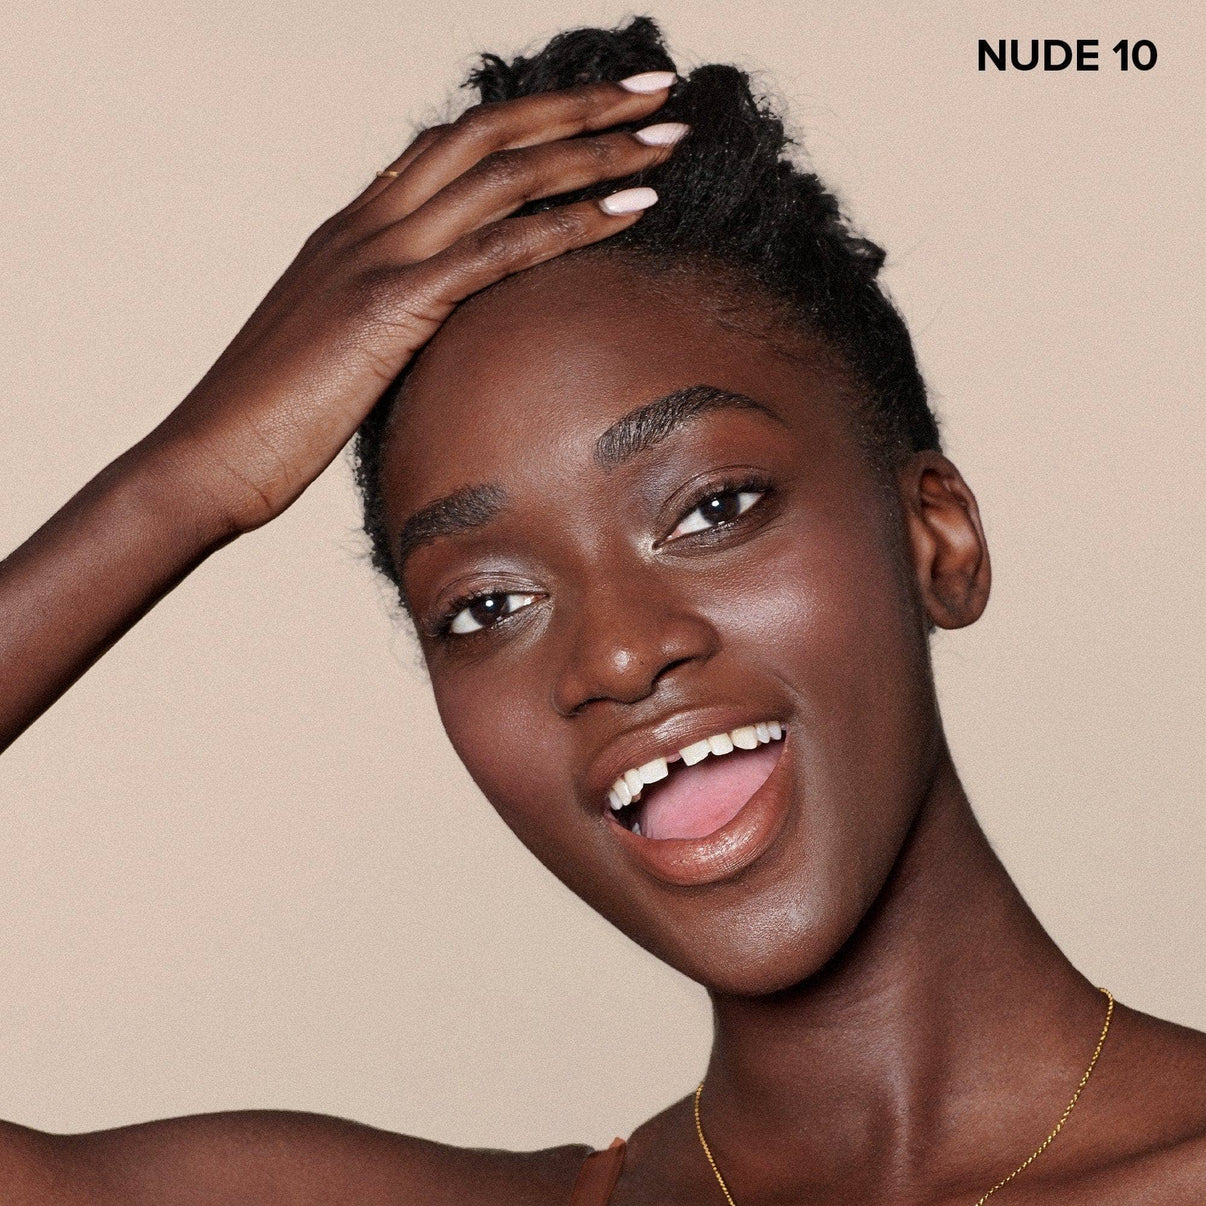 Deep skinned young woman wearing Nudefix cream concealer in shade nude 10